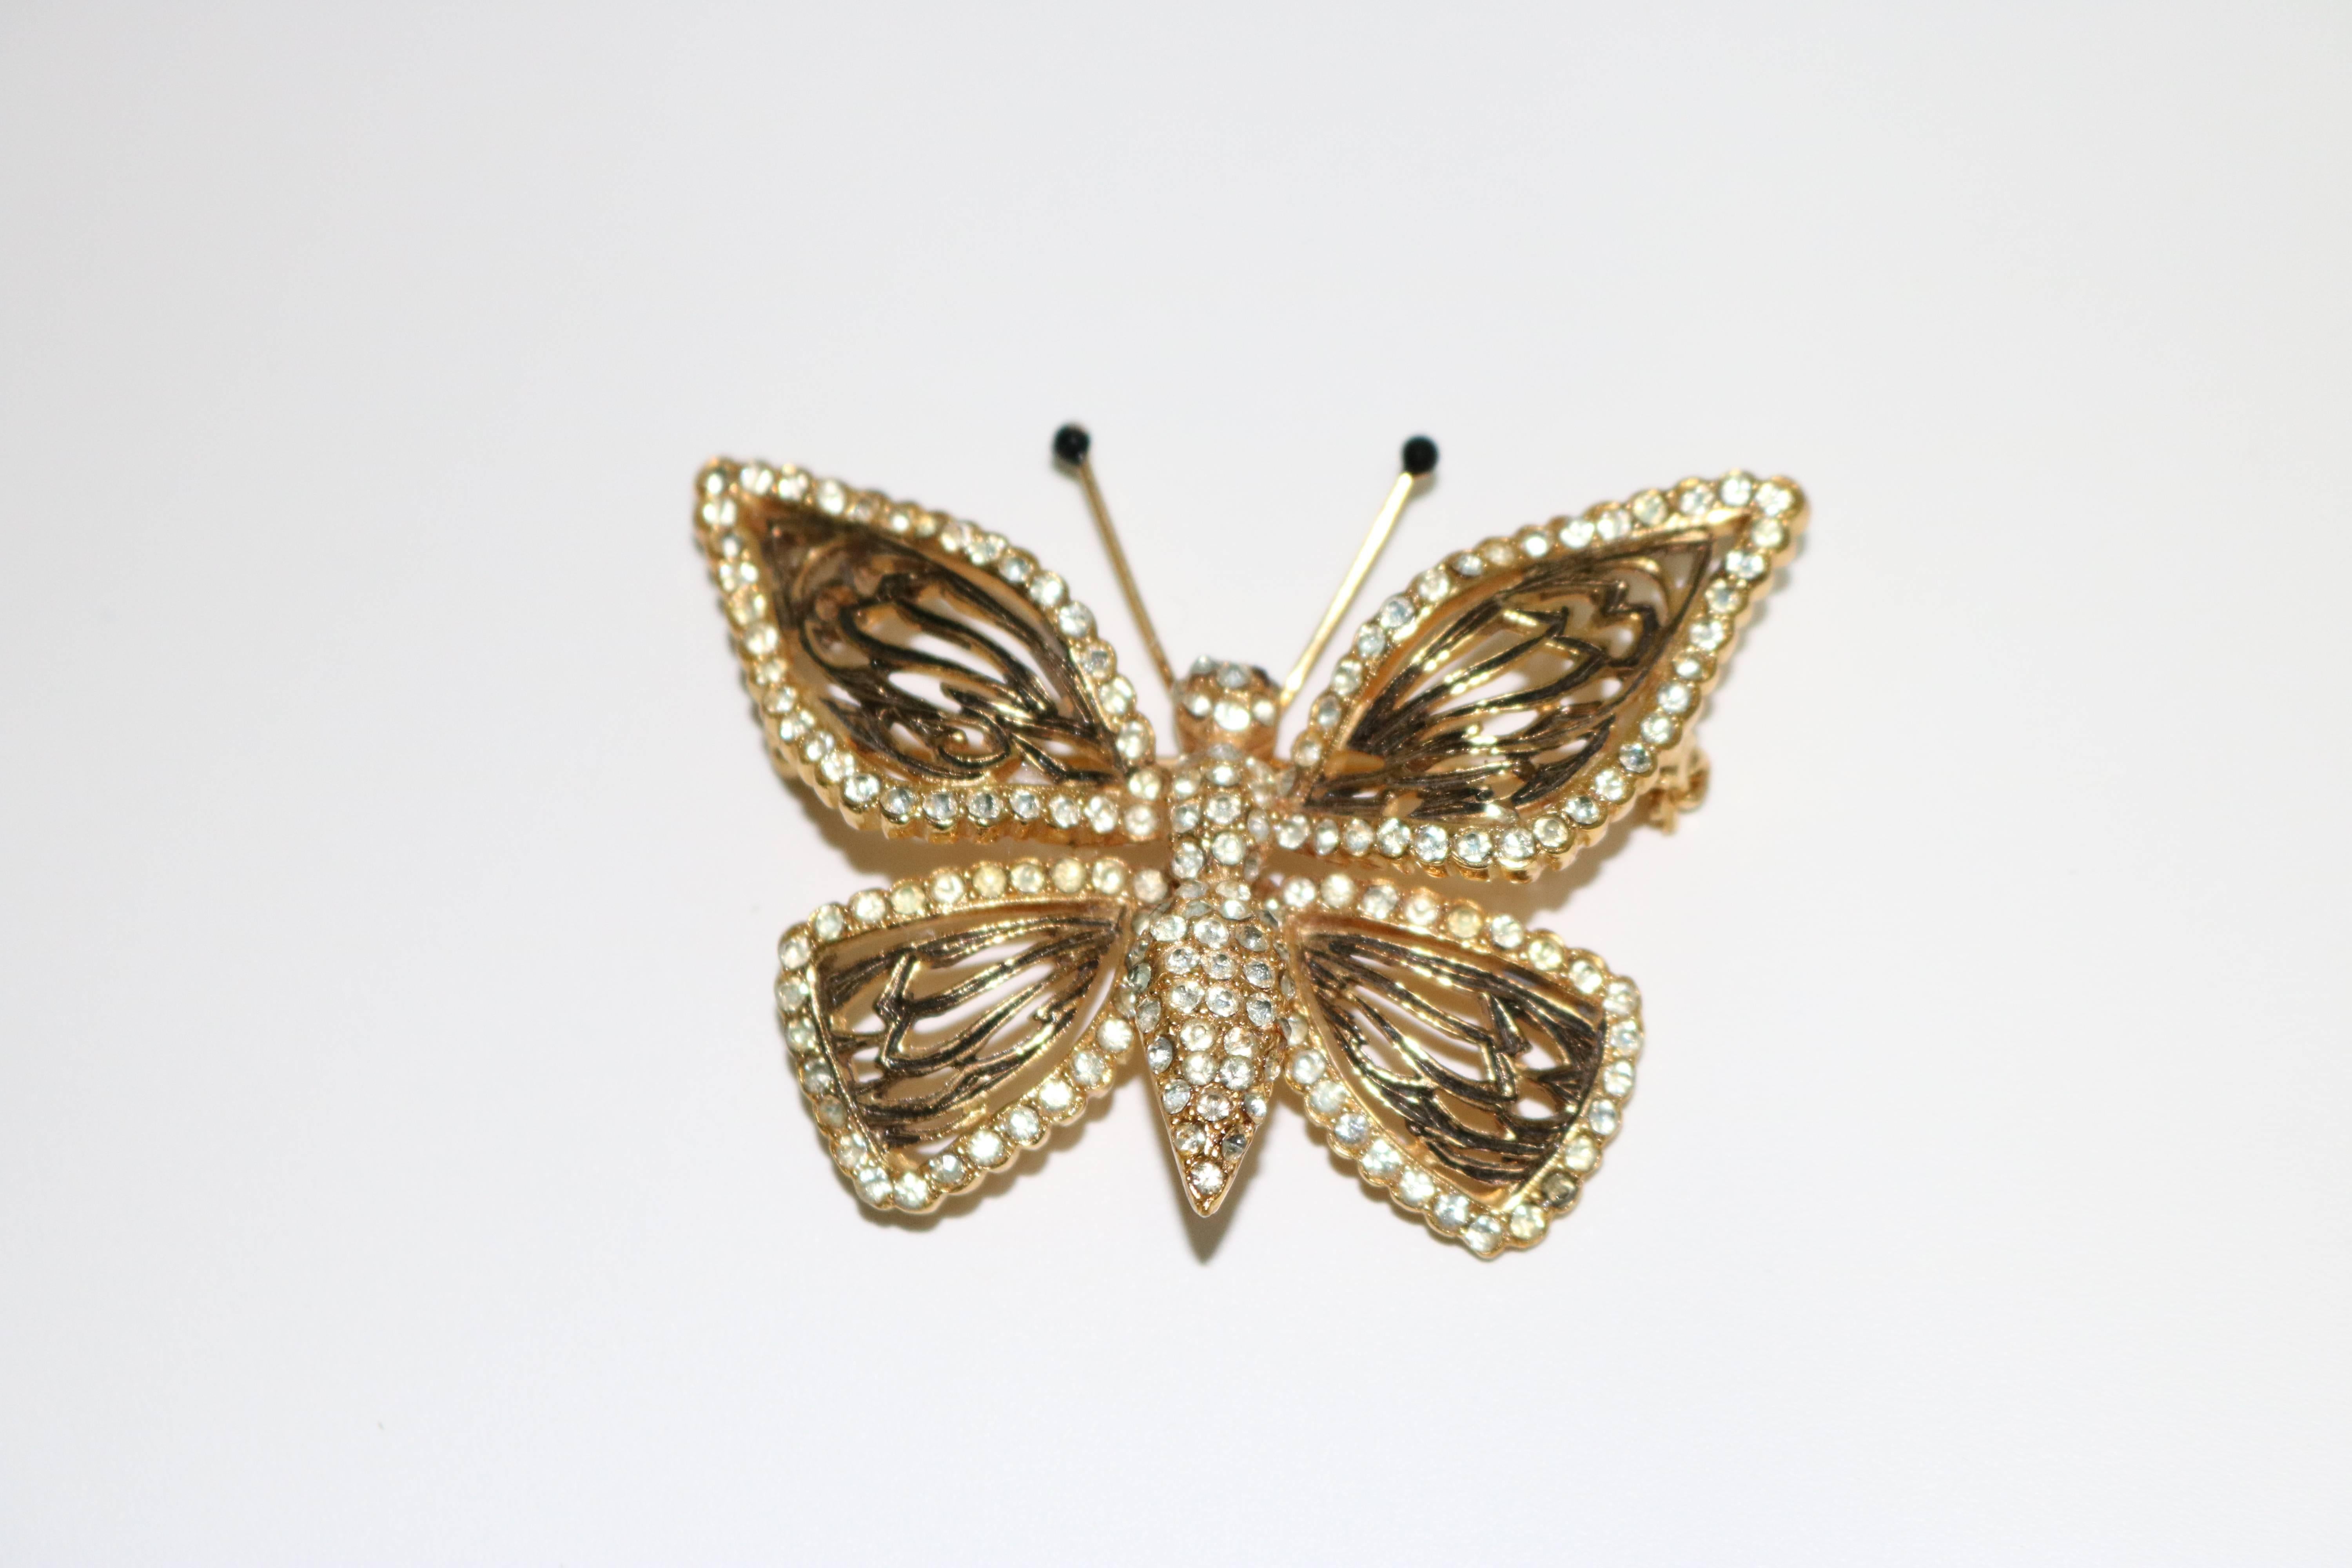 A lovely Gold Plate butterfly with diamante embellished wings and body, gold with black enameled articulated wings and black stone topped antennae with red stone eyes.  
Turns a moth into an Enchanting Butterfly!!

Marked en verso- Vogue